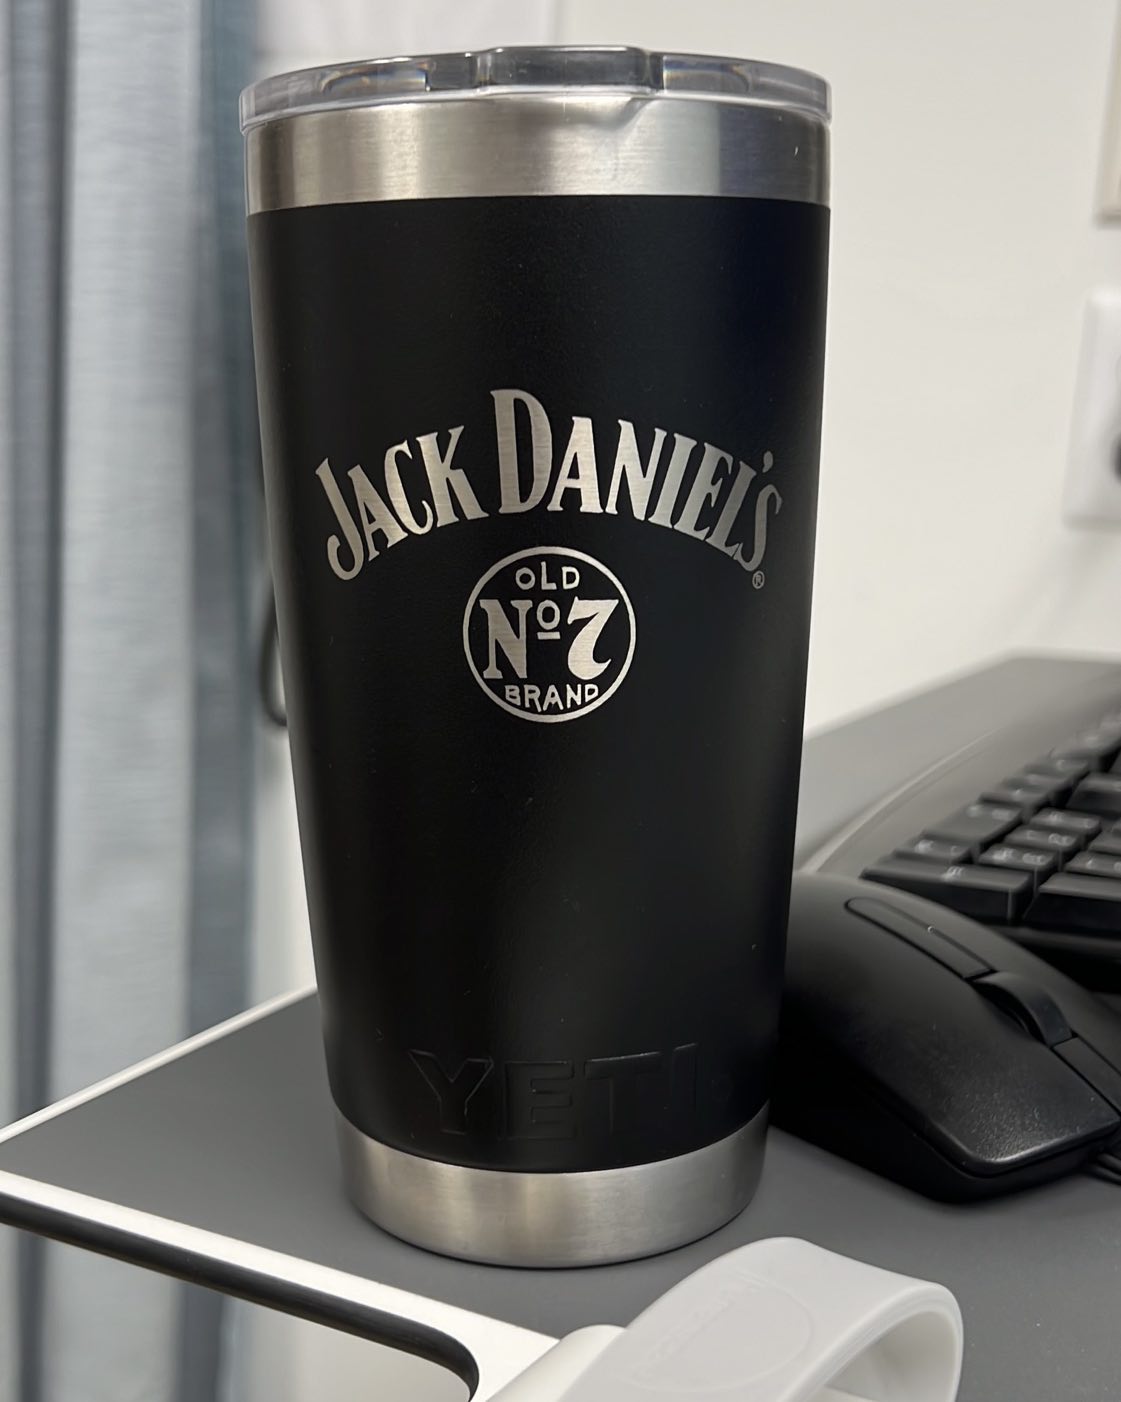 At the doctor’s this morning…
“Do you use tobacco?”
“Never”
“Do you drink alcohol?”
(Takes a sip of coffee from this mug…)
“Ummm…yeah. It’s my job.” 😏